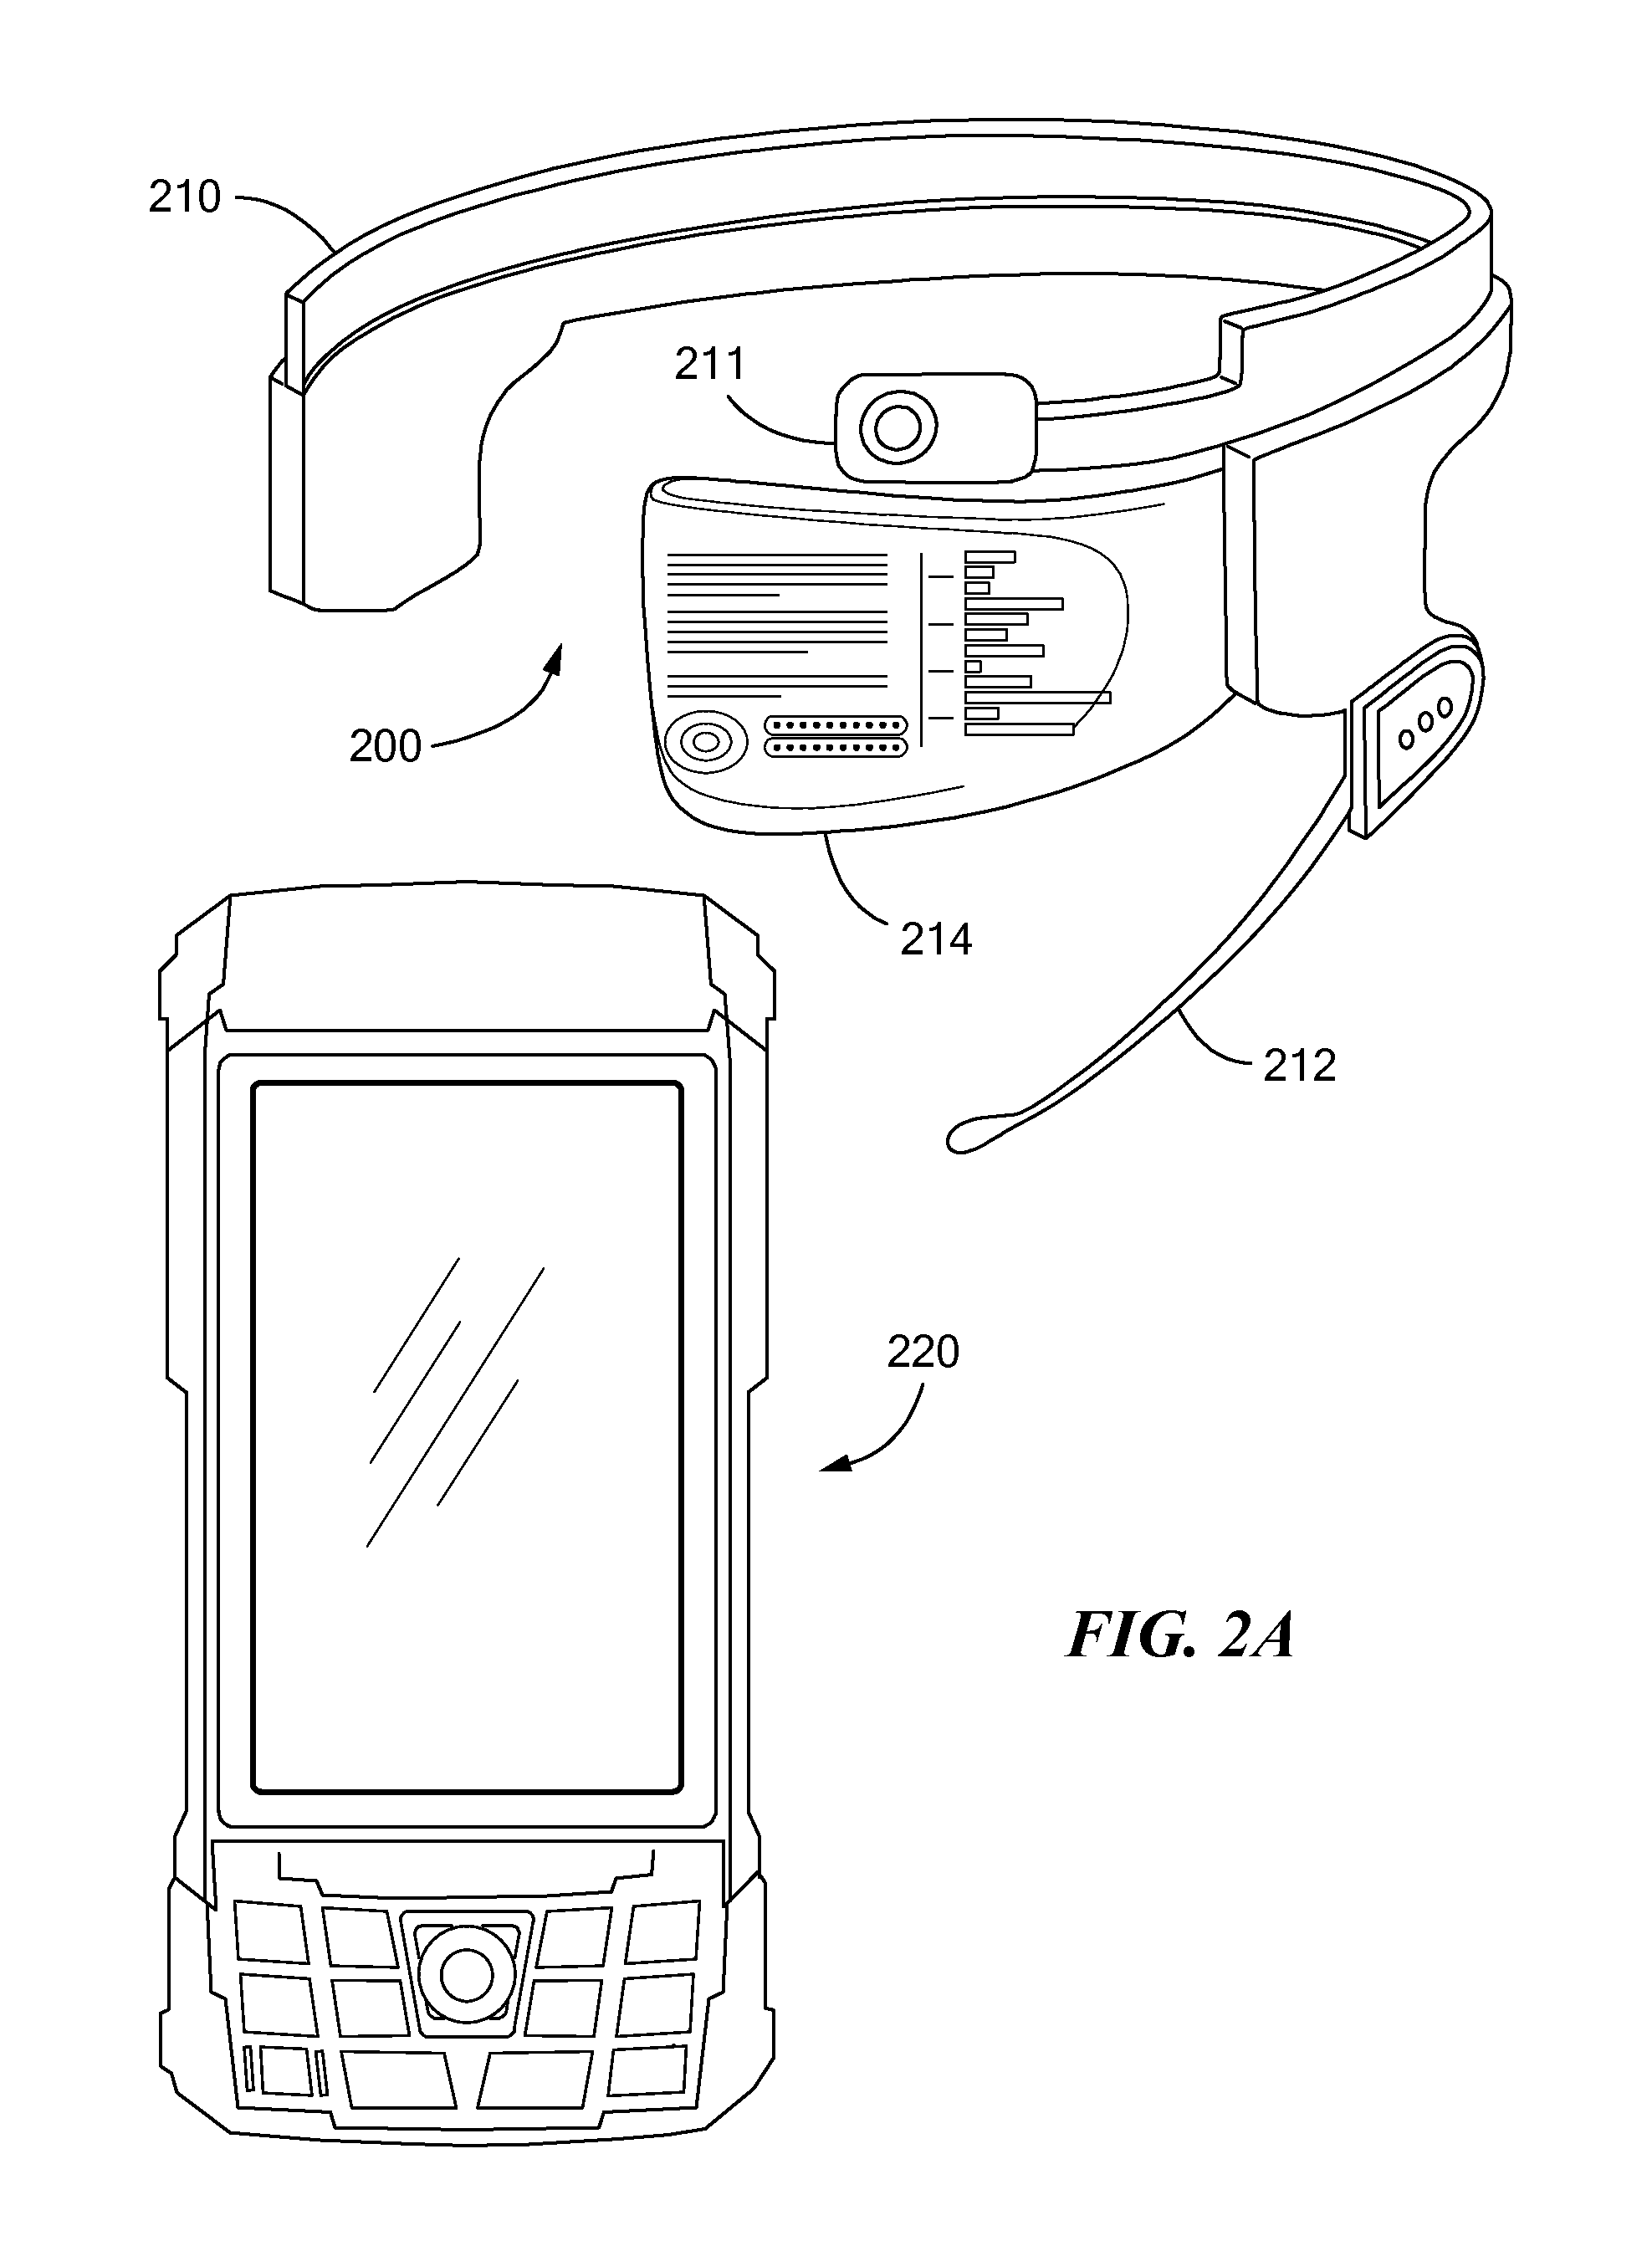 System and Method for Mobile Workflow Processing